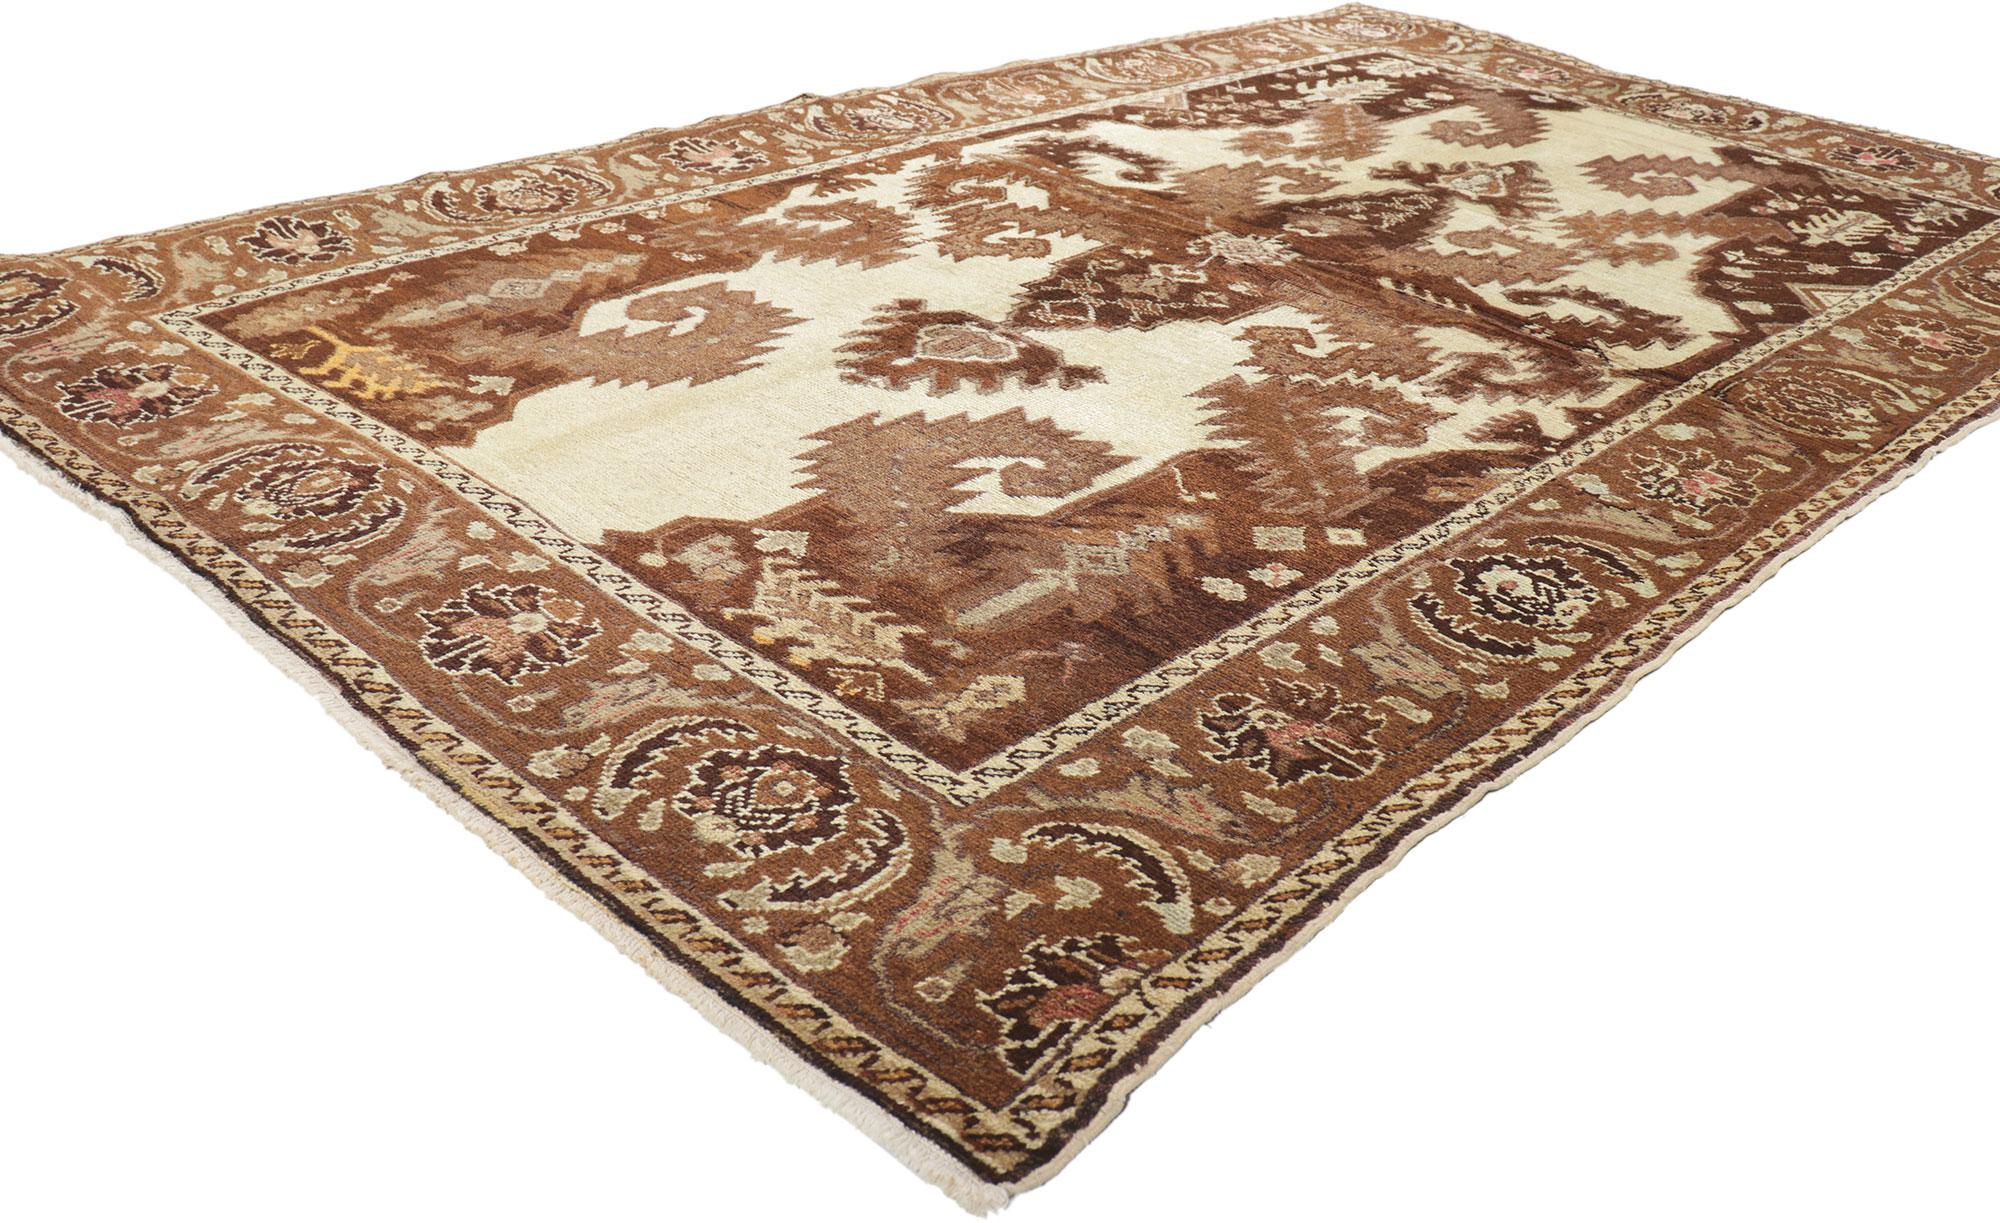 50335 Vintage Turkish Oushak Rug, 04'05 x 07'03. Immerse your space in the timeless allure of Mid-Century Modern aesthetics with this hand-knotted wool vintage Turkish Oushak rug. Radiating warmth and inviting charm, this vintage Oushak rug